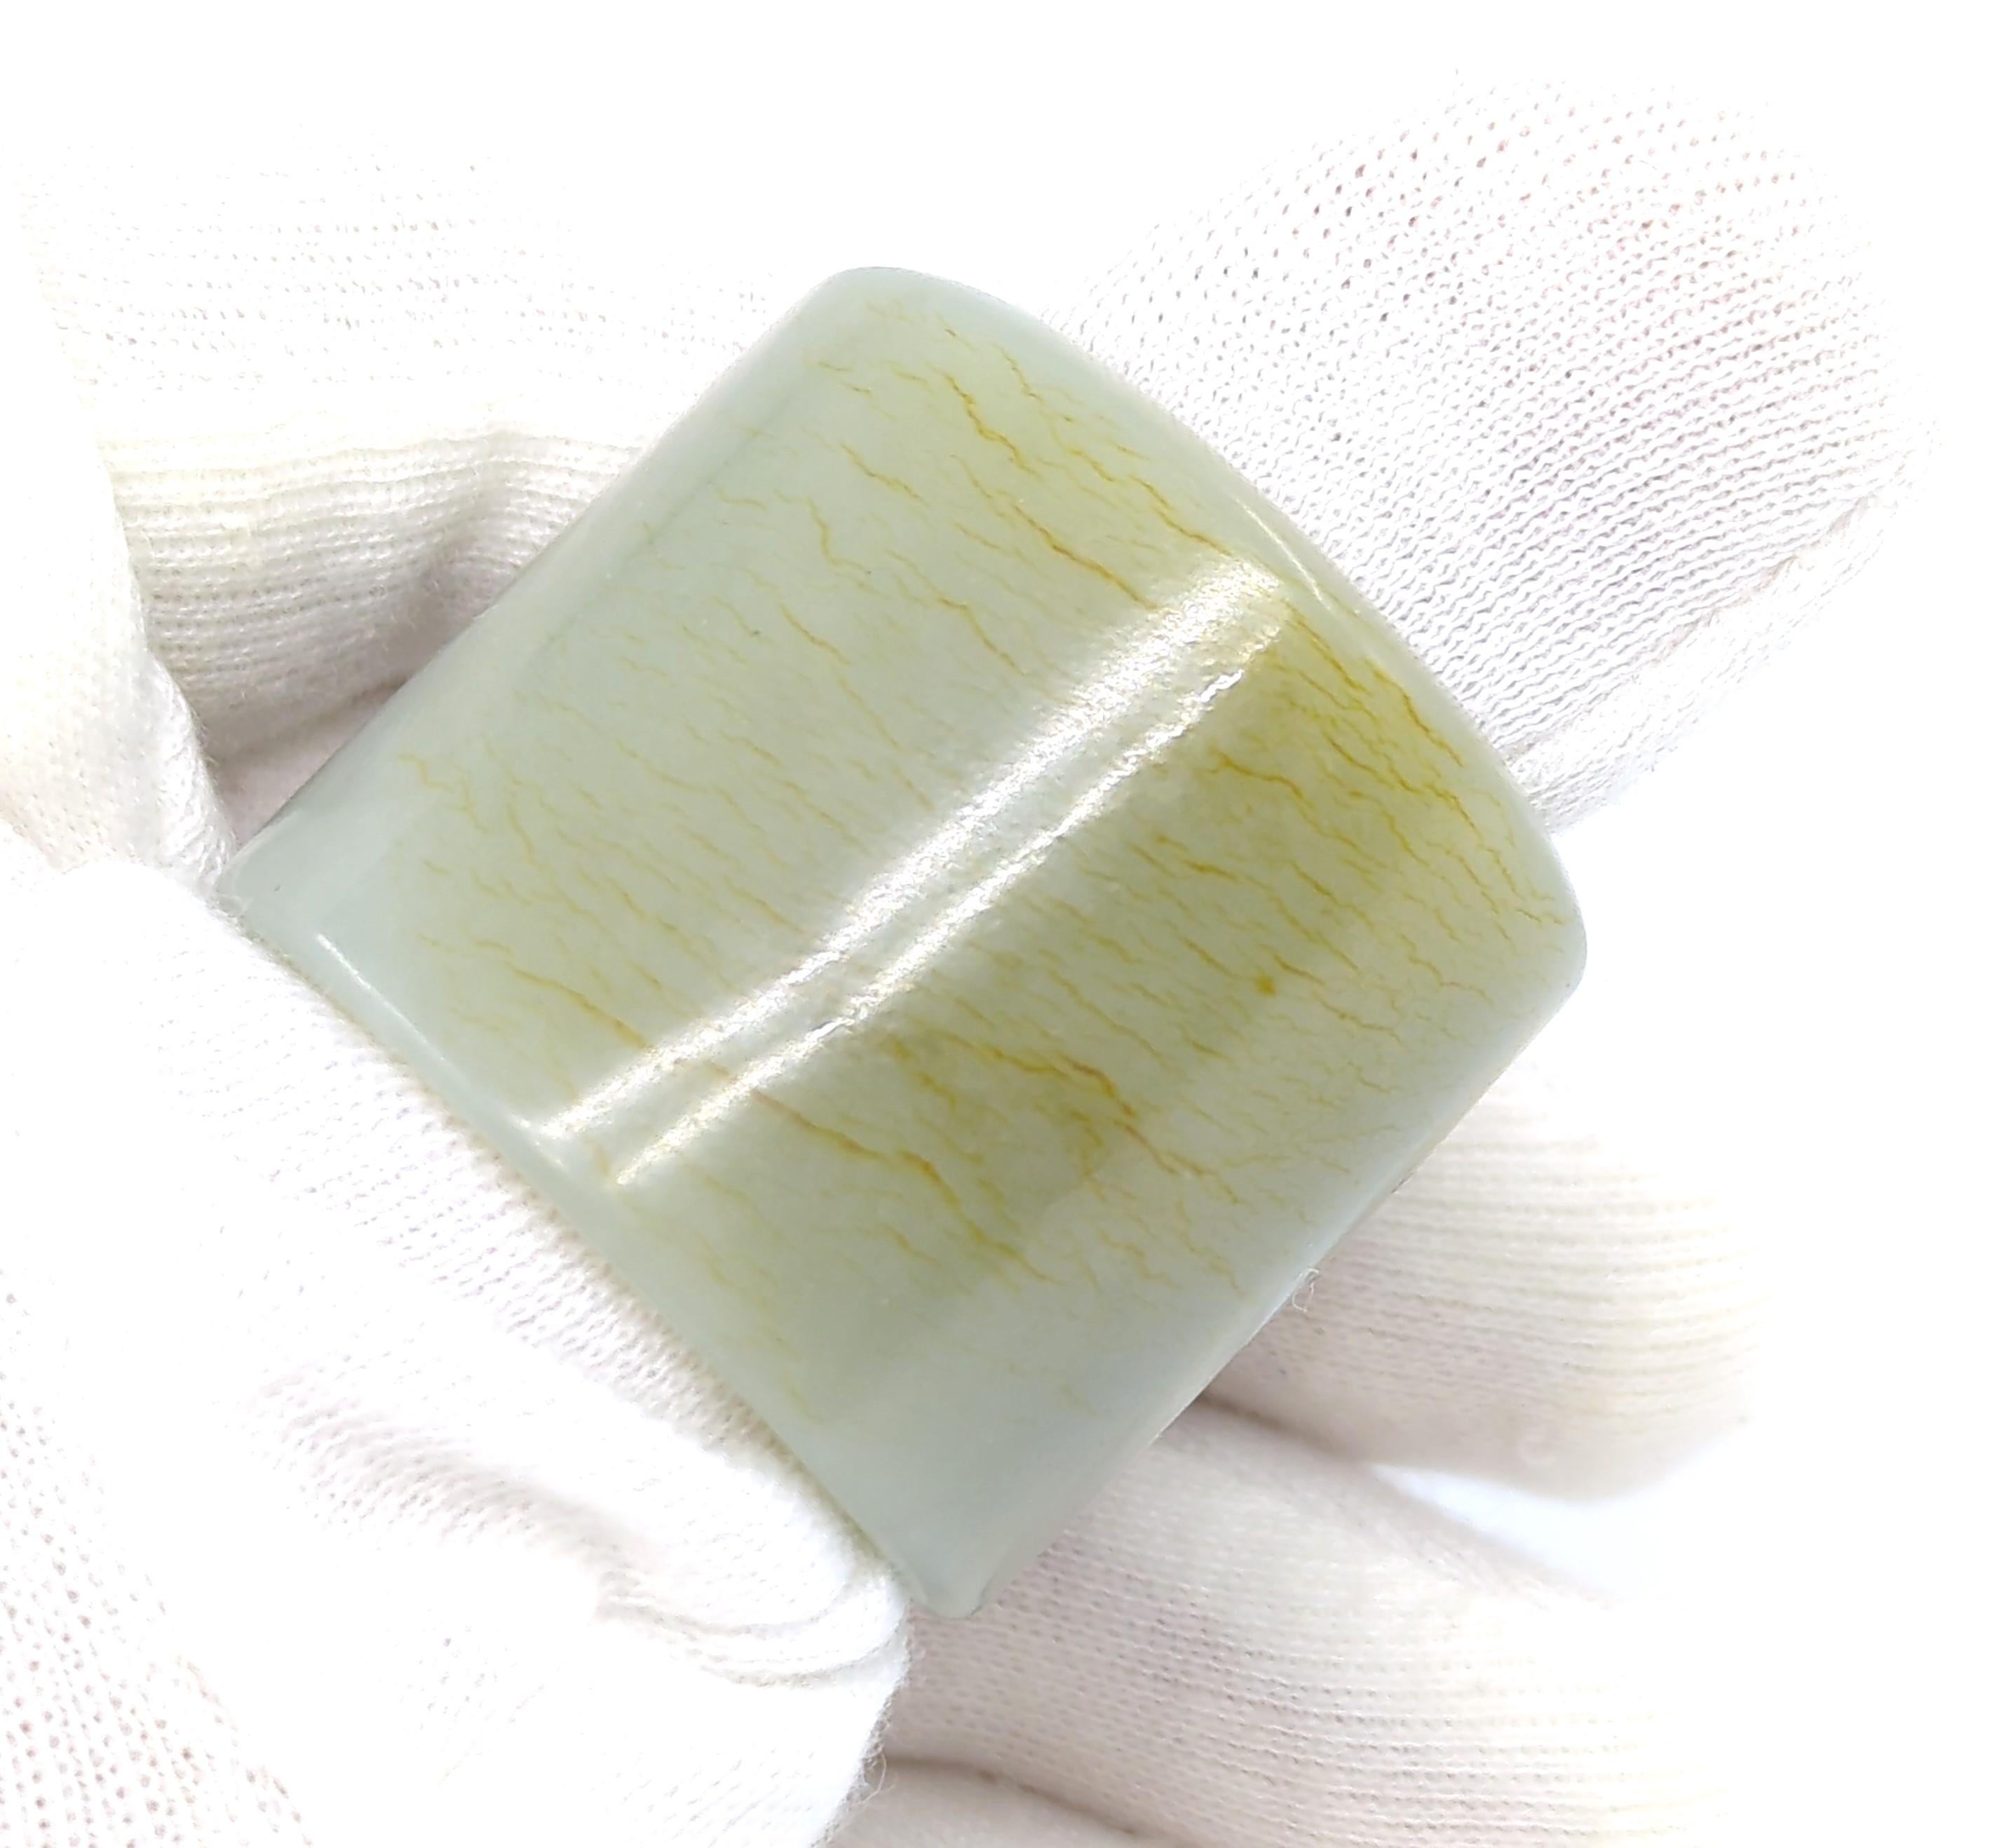 Women's or Men's Antique Chinese Celadon Jade Thumb Ring With Golden Russet Inclusion Size 13.25 For Sale